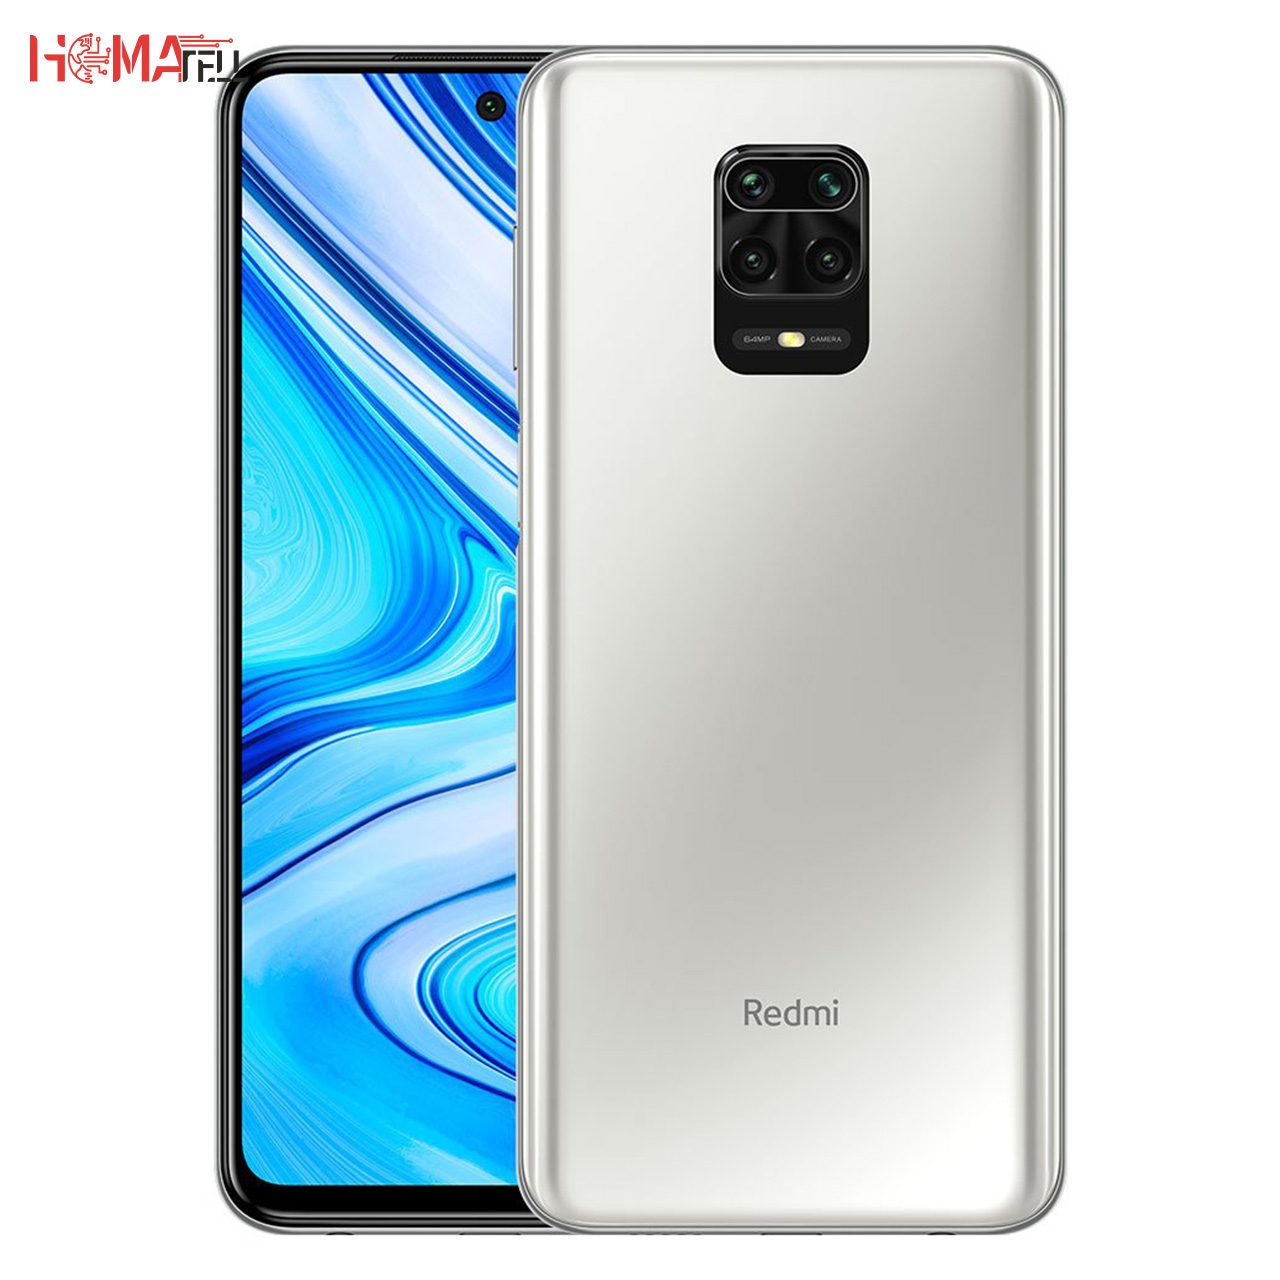 Note 9 4 128. Xiaomi Redmi Note 9 Pro. Xiaomi Redmi Note 9 Pro 128gb. Xiaomi Note 9s. Смартфон Xiaomi Redmi Note 9s.